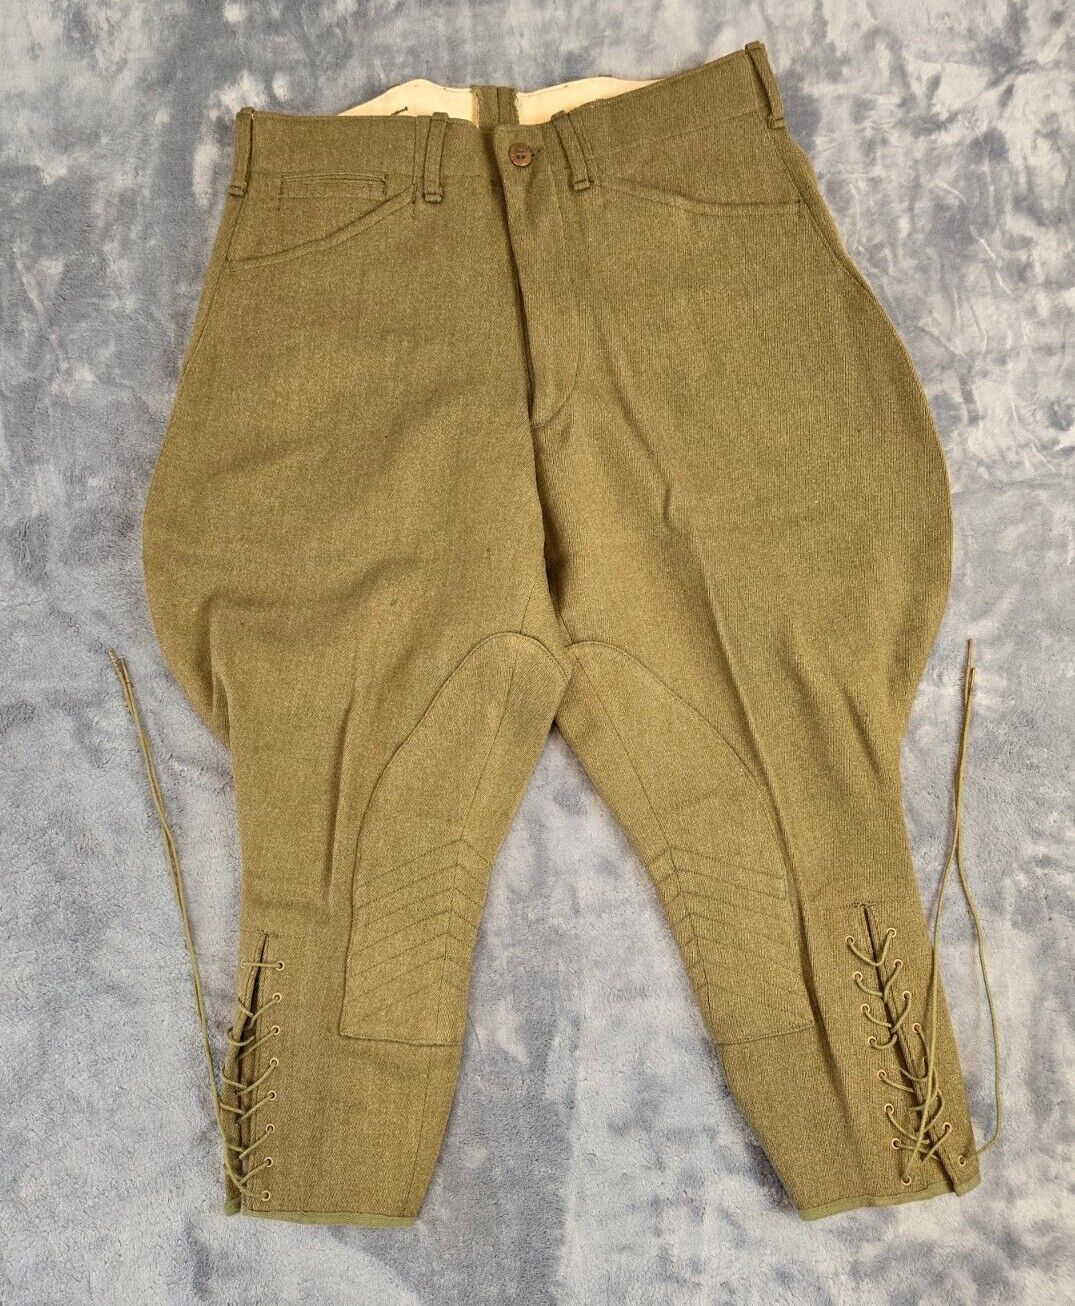 ORIGINAL Pre WWII 1932 US ARMY OFFICER M1917 GABARDINE WOOL BREECHES Trousers 